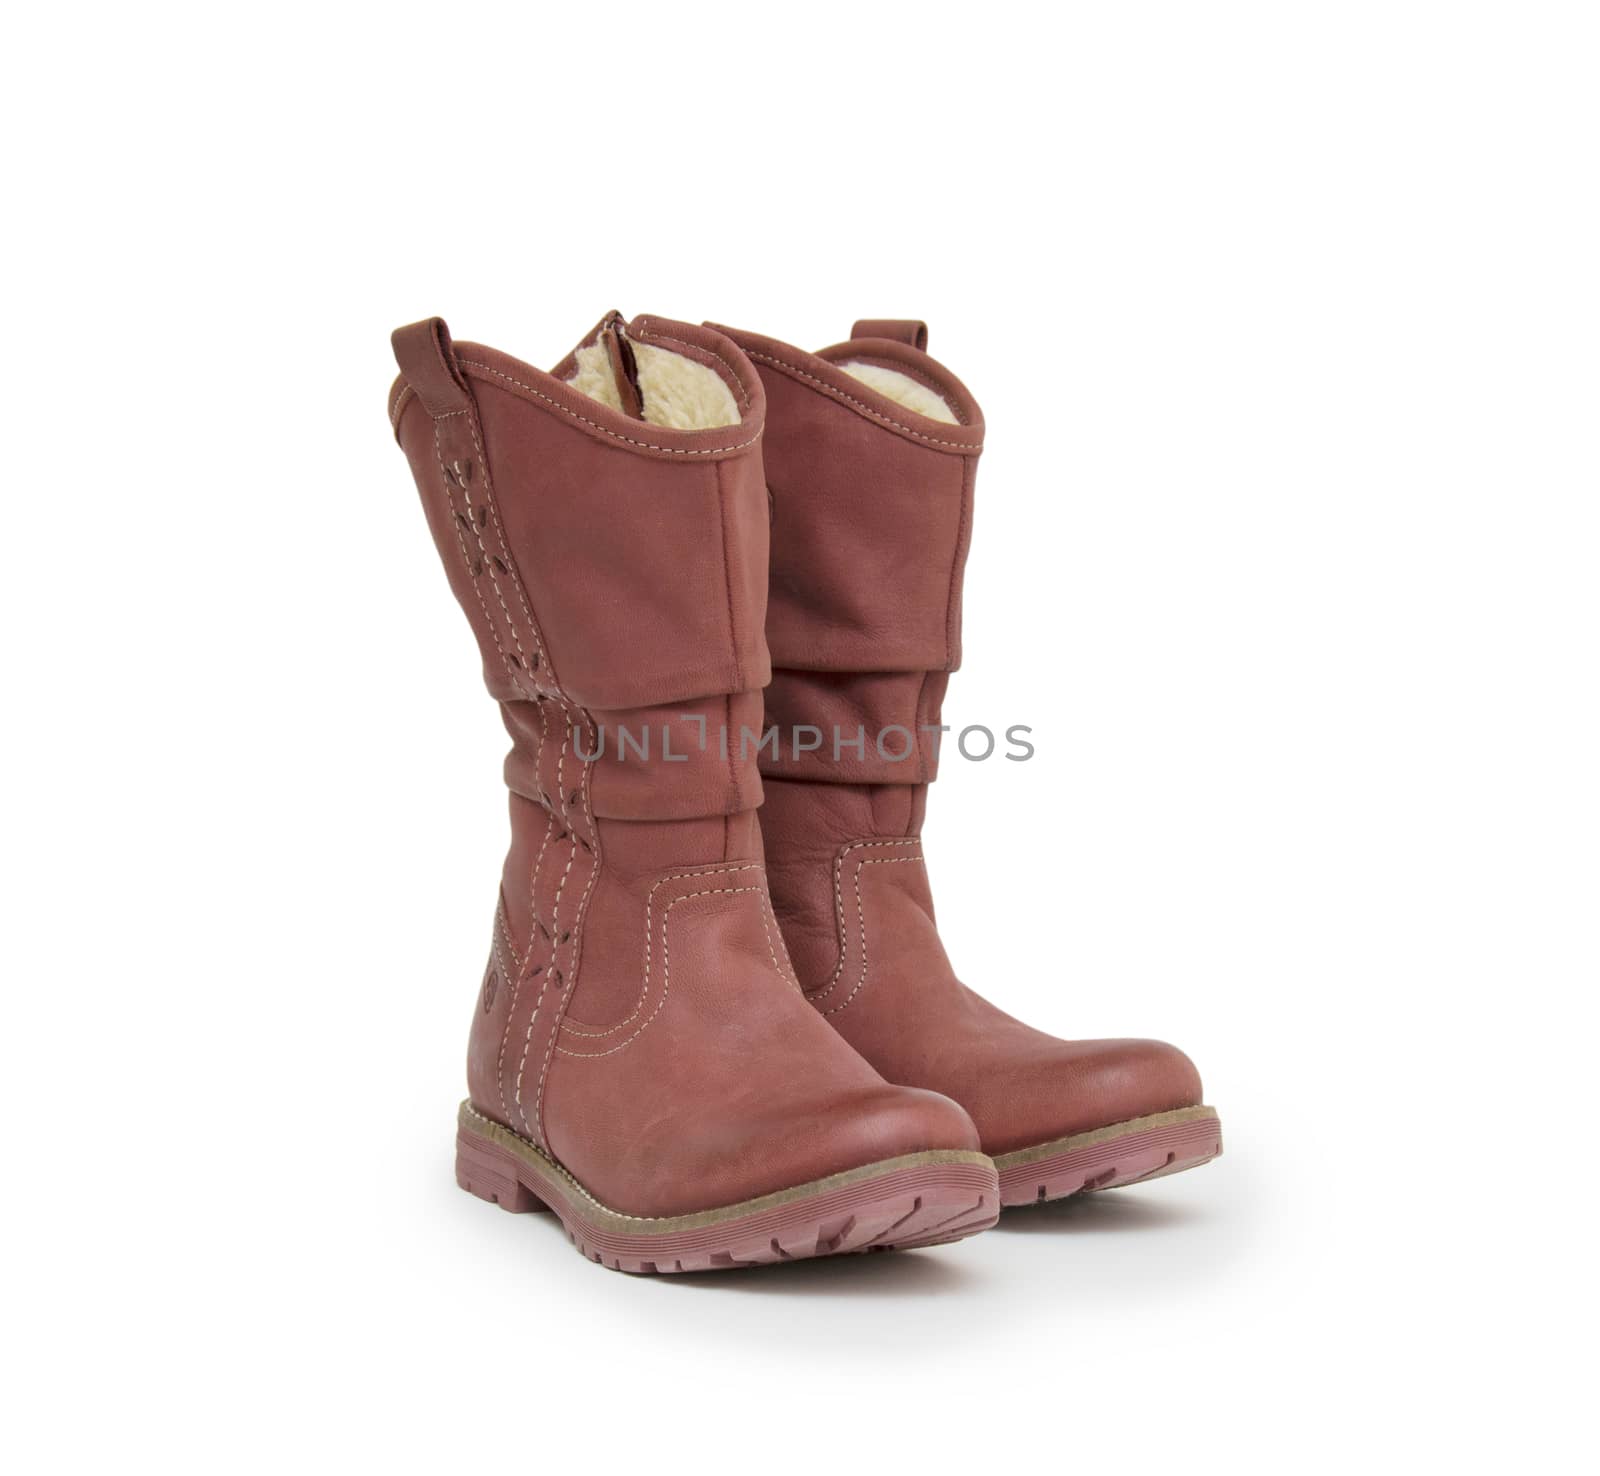 A pair of boots isolated on a white background.